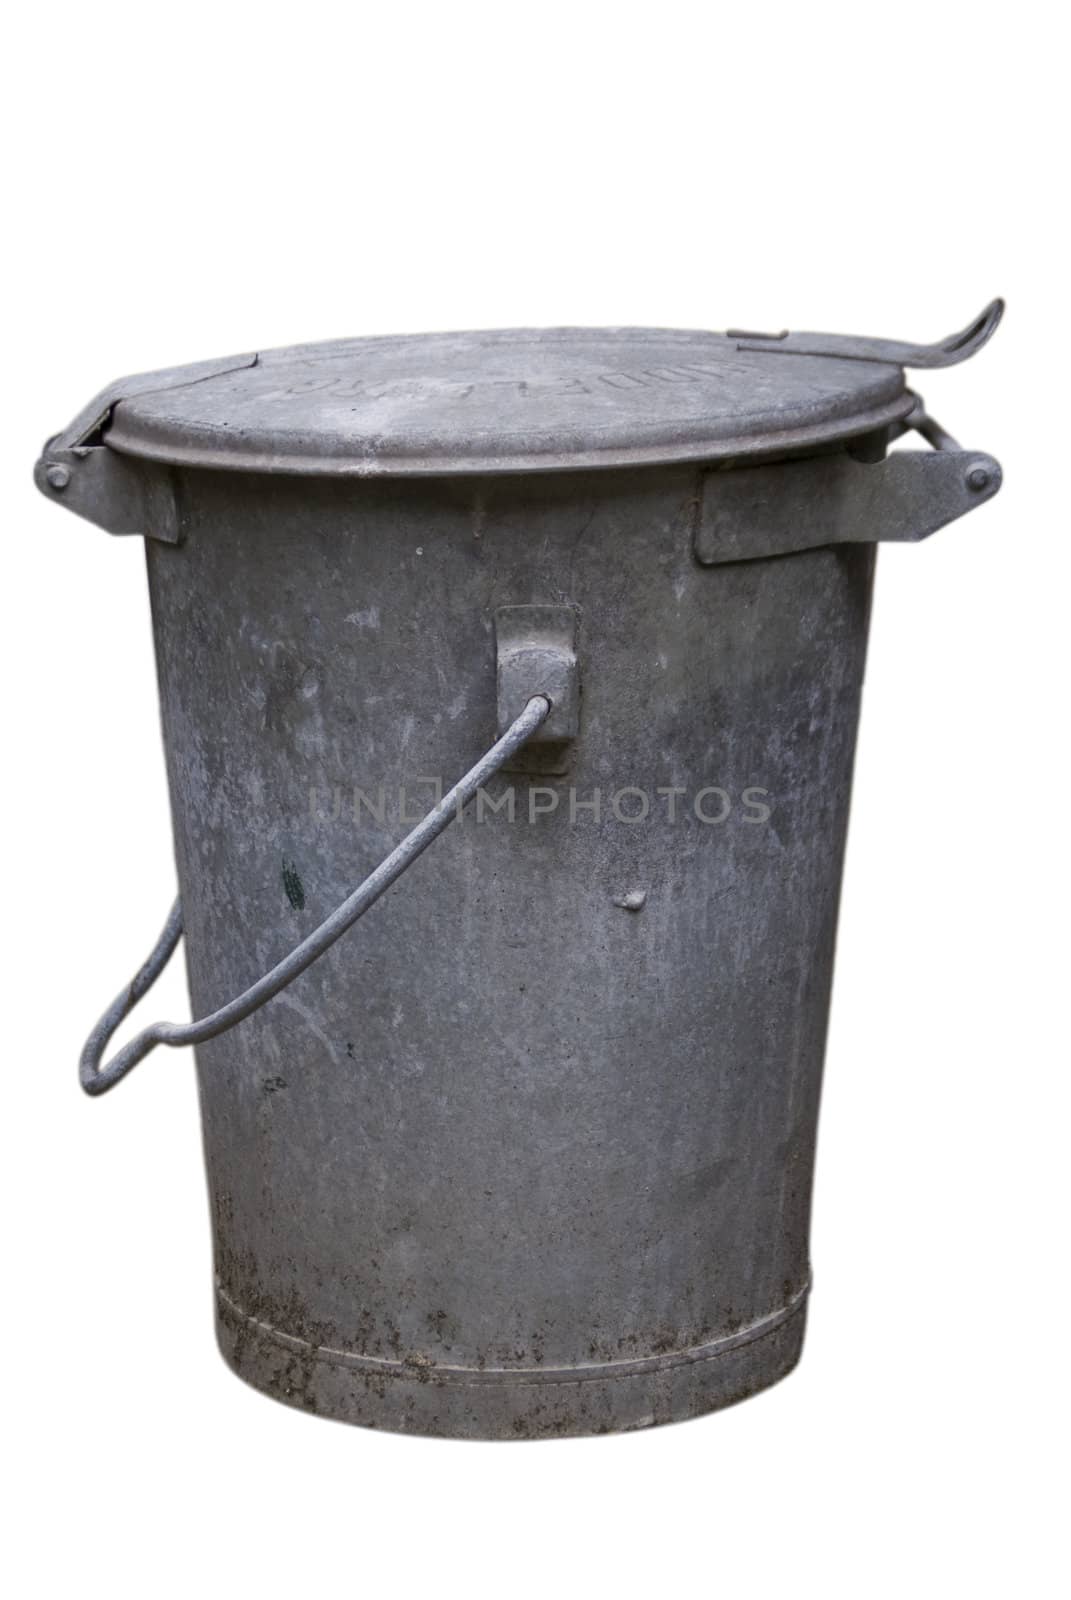 Old authentic heavy metal gray trash can against a white background.
Lid is closed, handle is down to the side. Wear and tear is visible but not dominant, trash can in still in use.